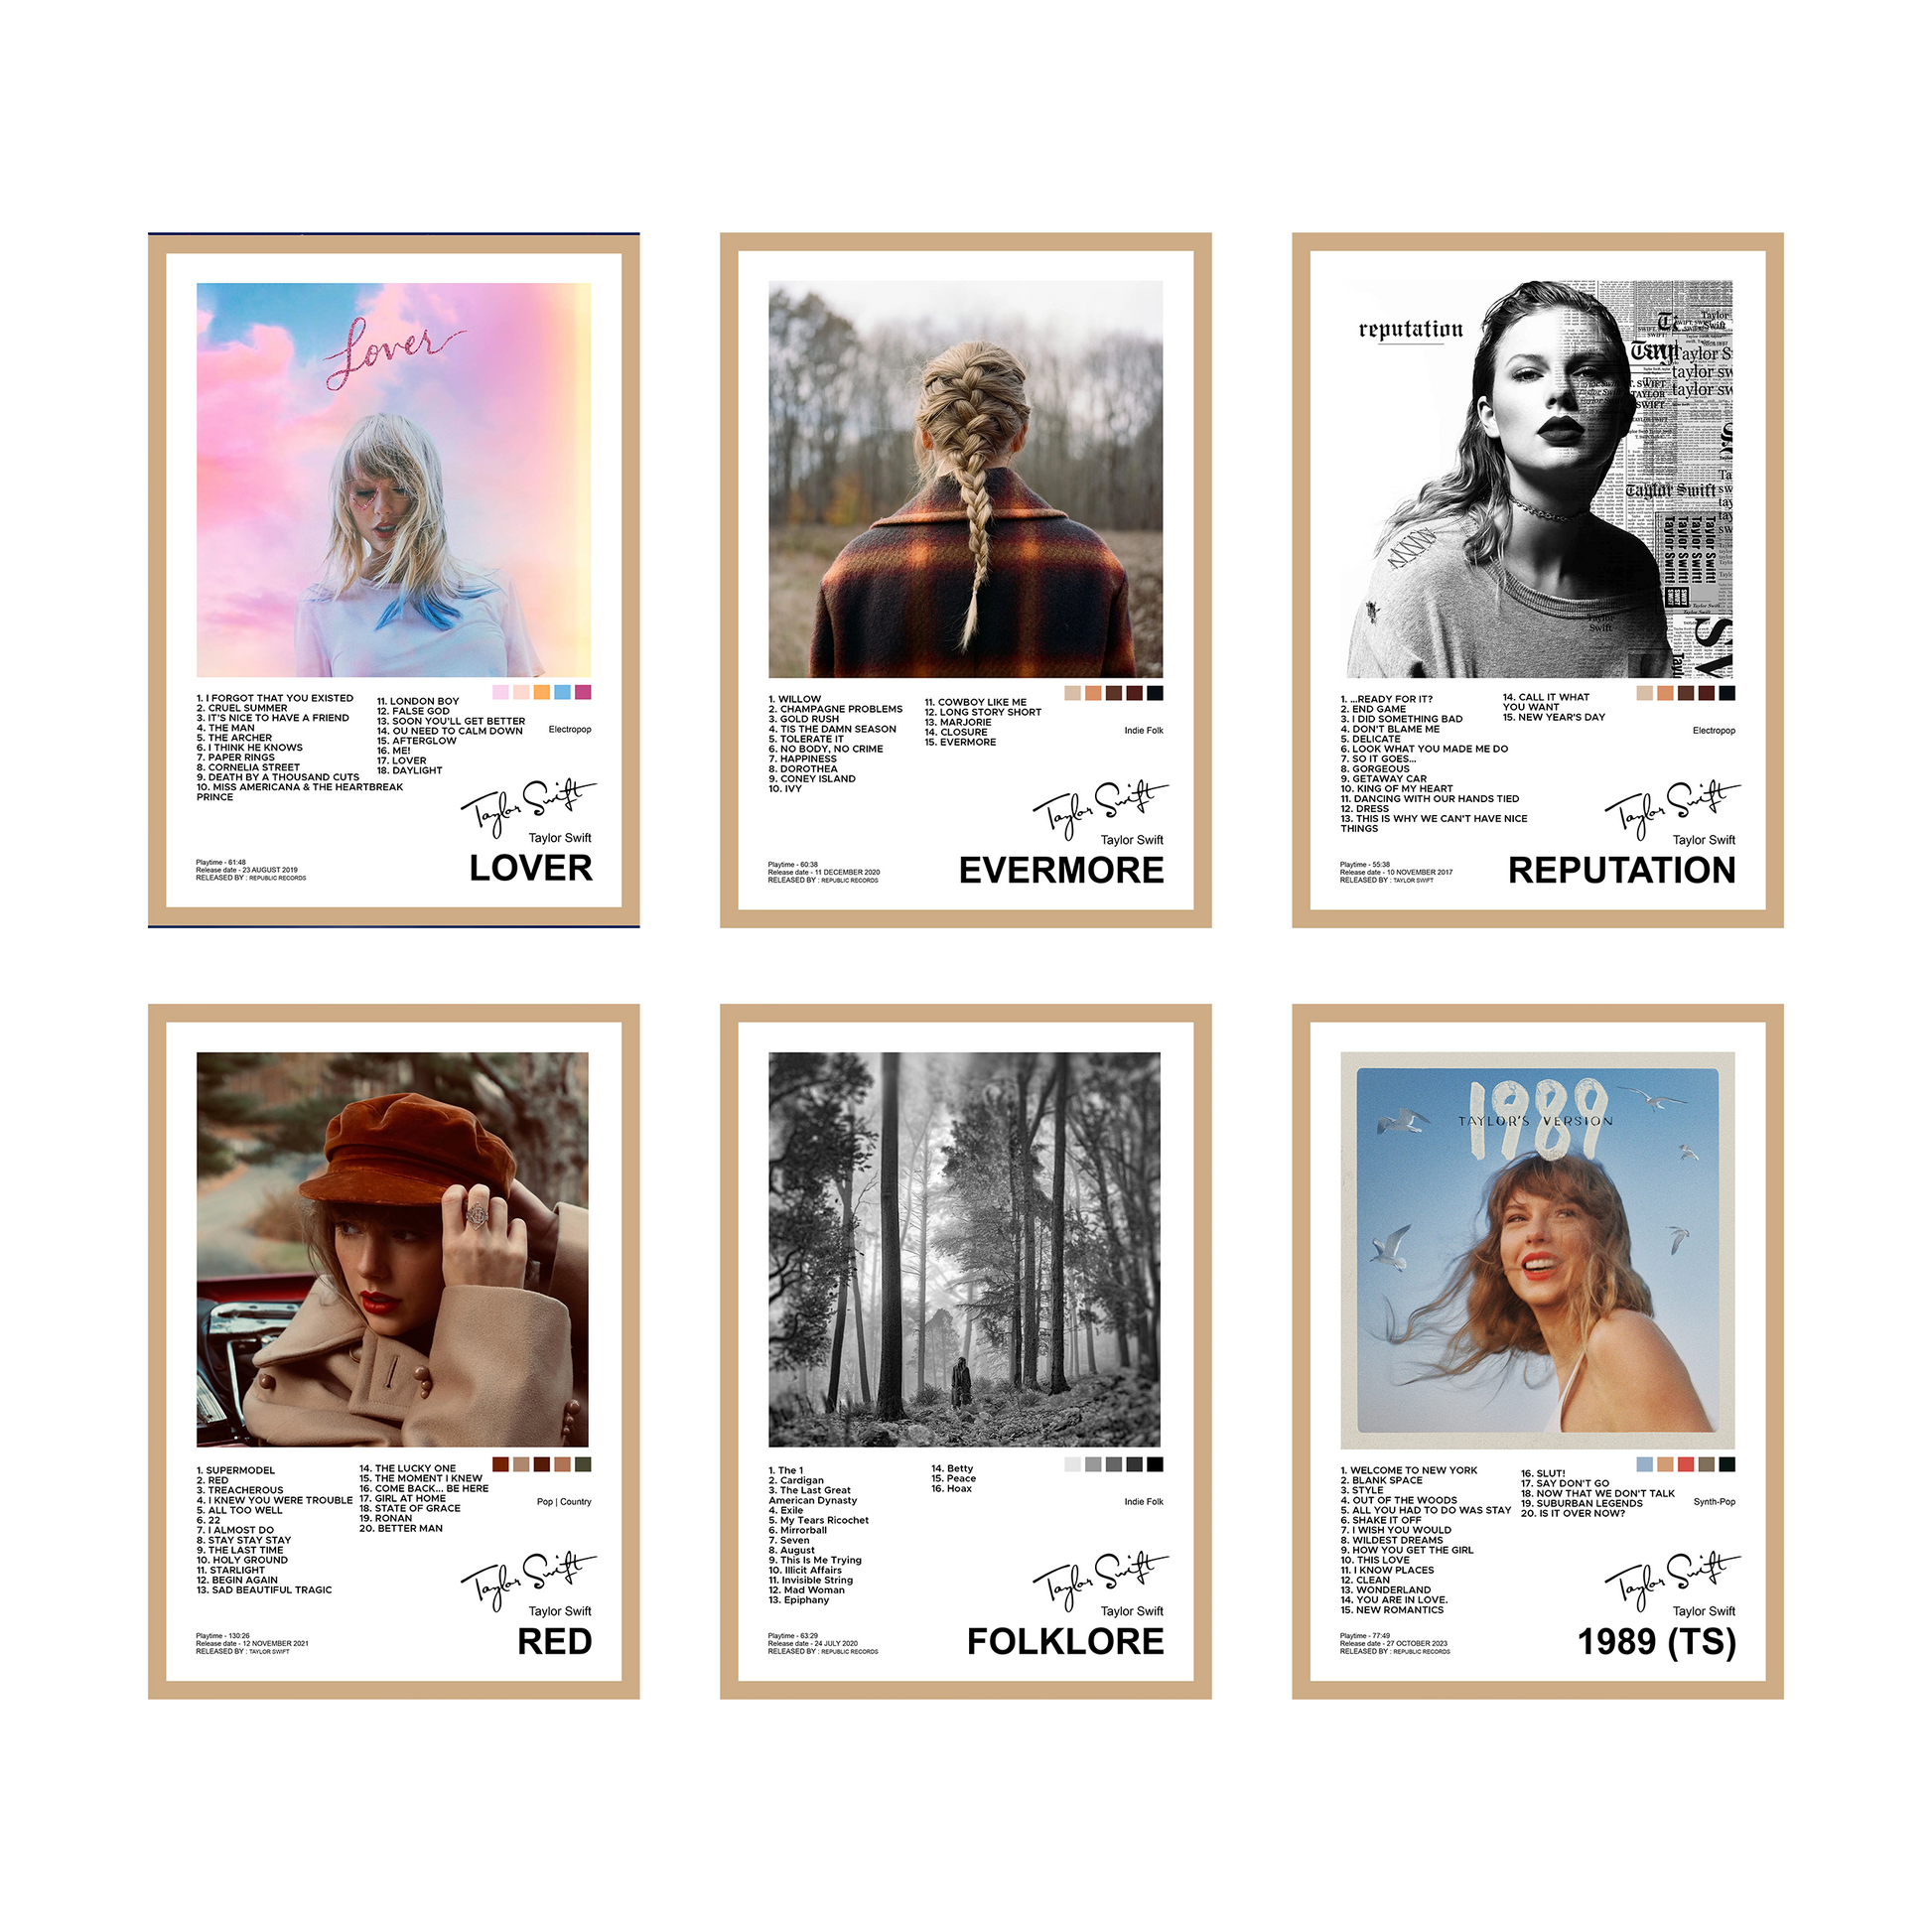 Taylor Swift Poster - The Tale Of Tunes at Rs 249.00, Posters